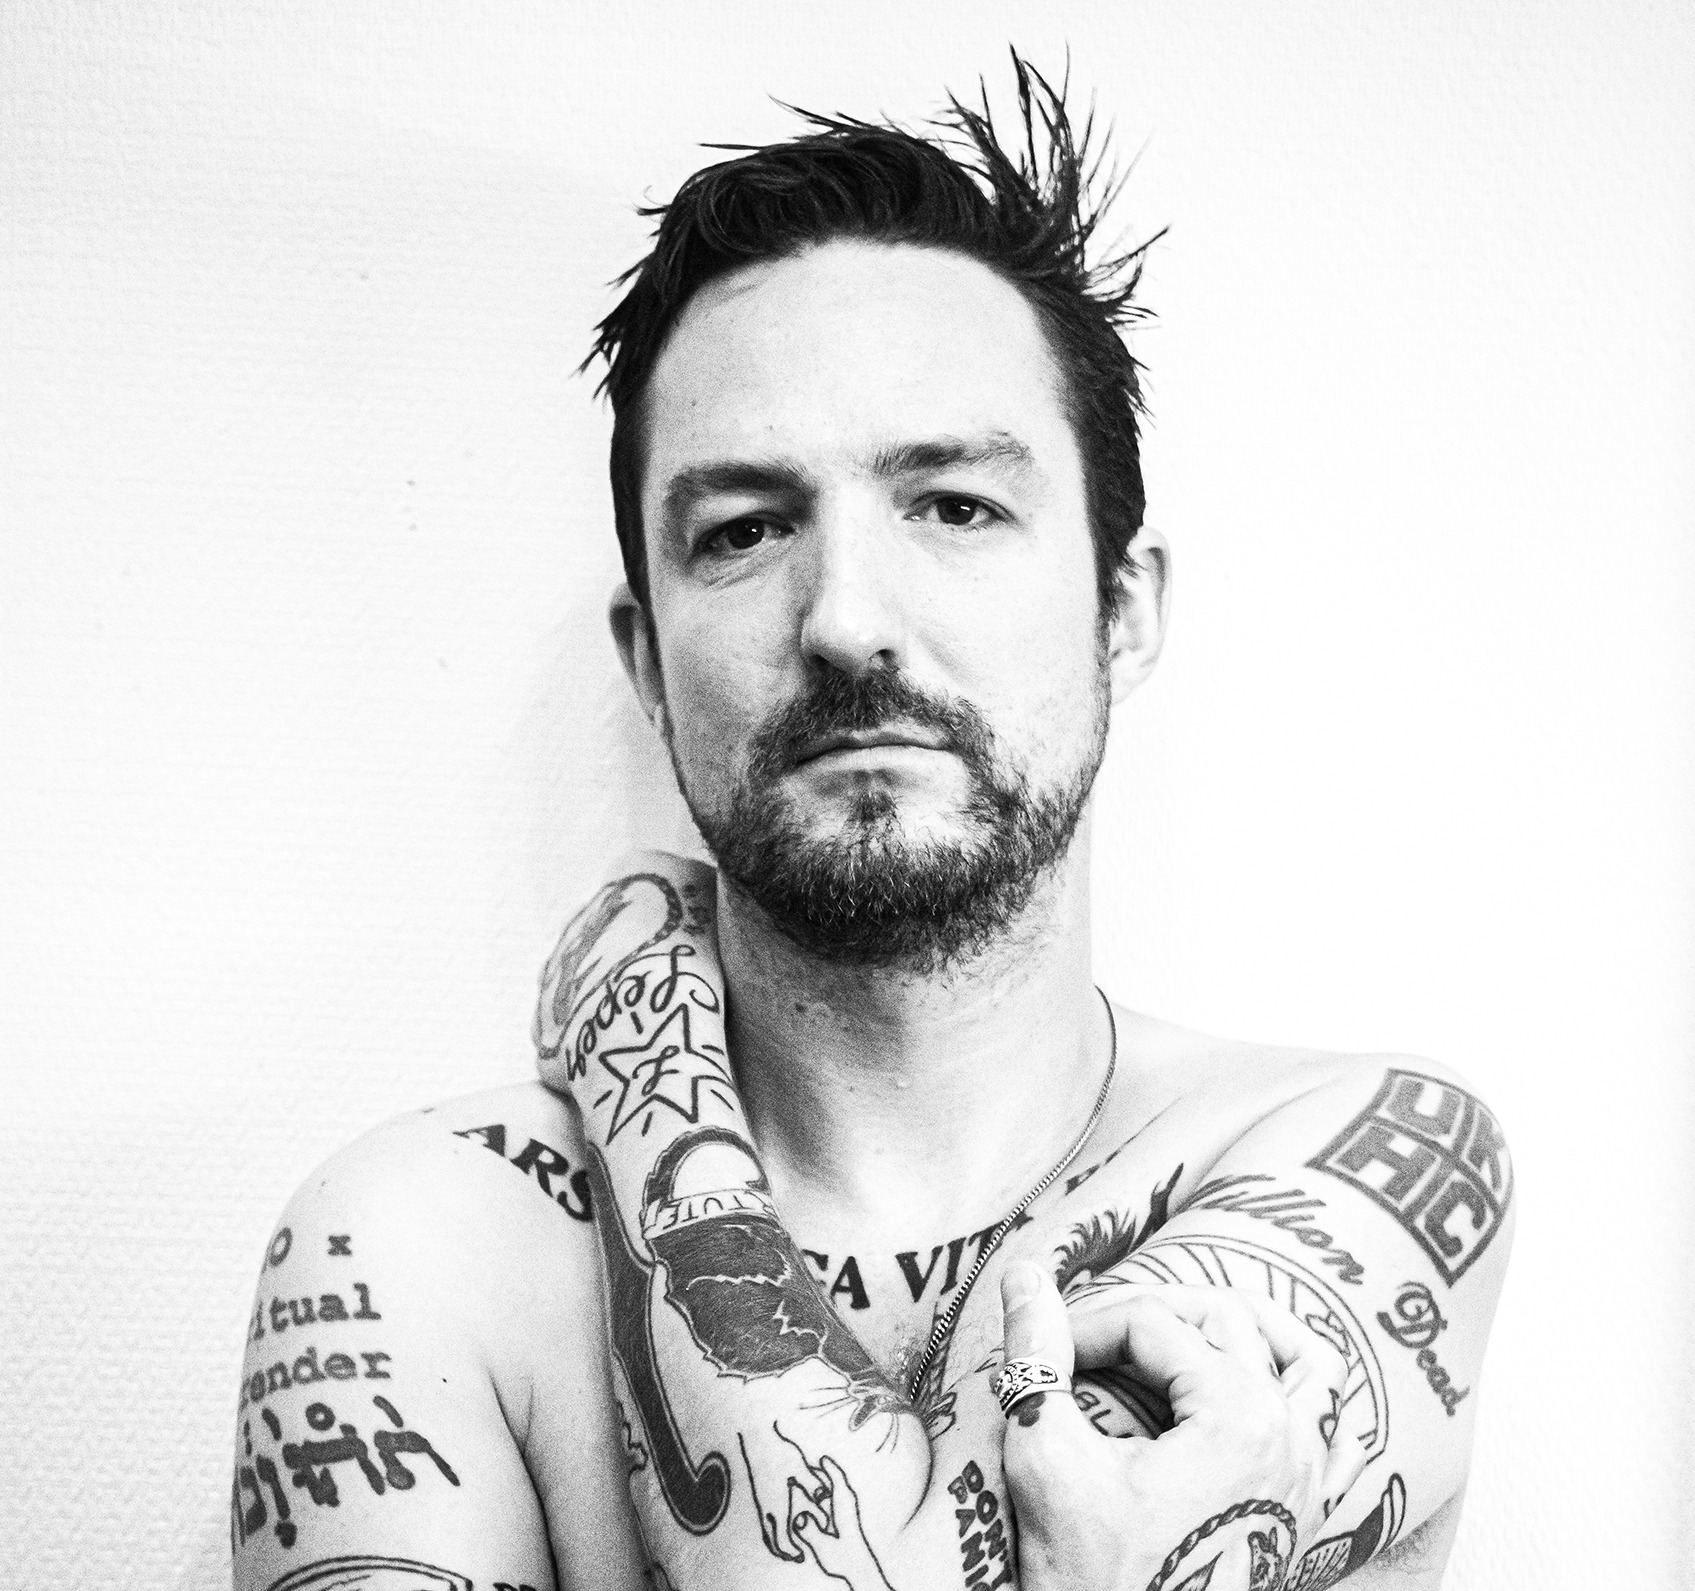 FRANK TURNER releases a new version of NOFX’s ‘Falling In Love’ - Listen Now 1